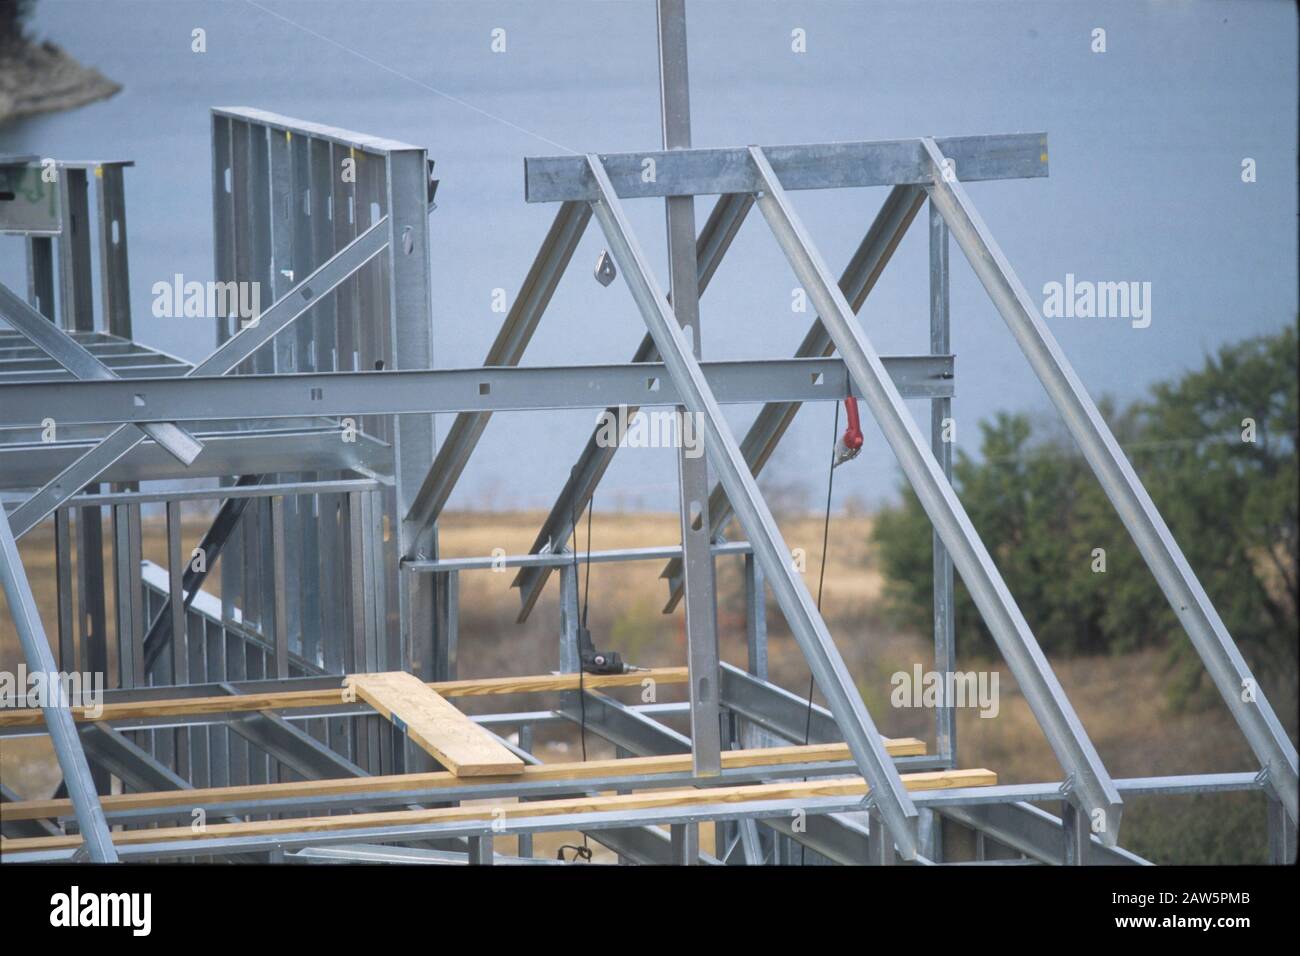 Home under construction using steel frame instead of wood for added strength. Stock Photo